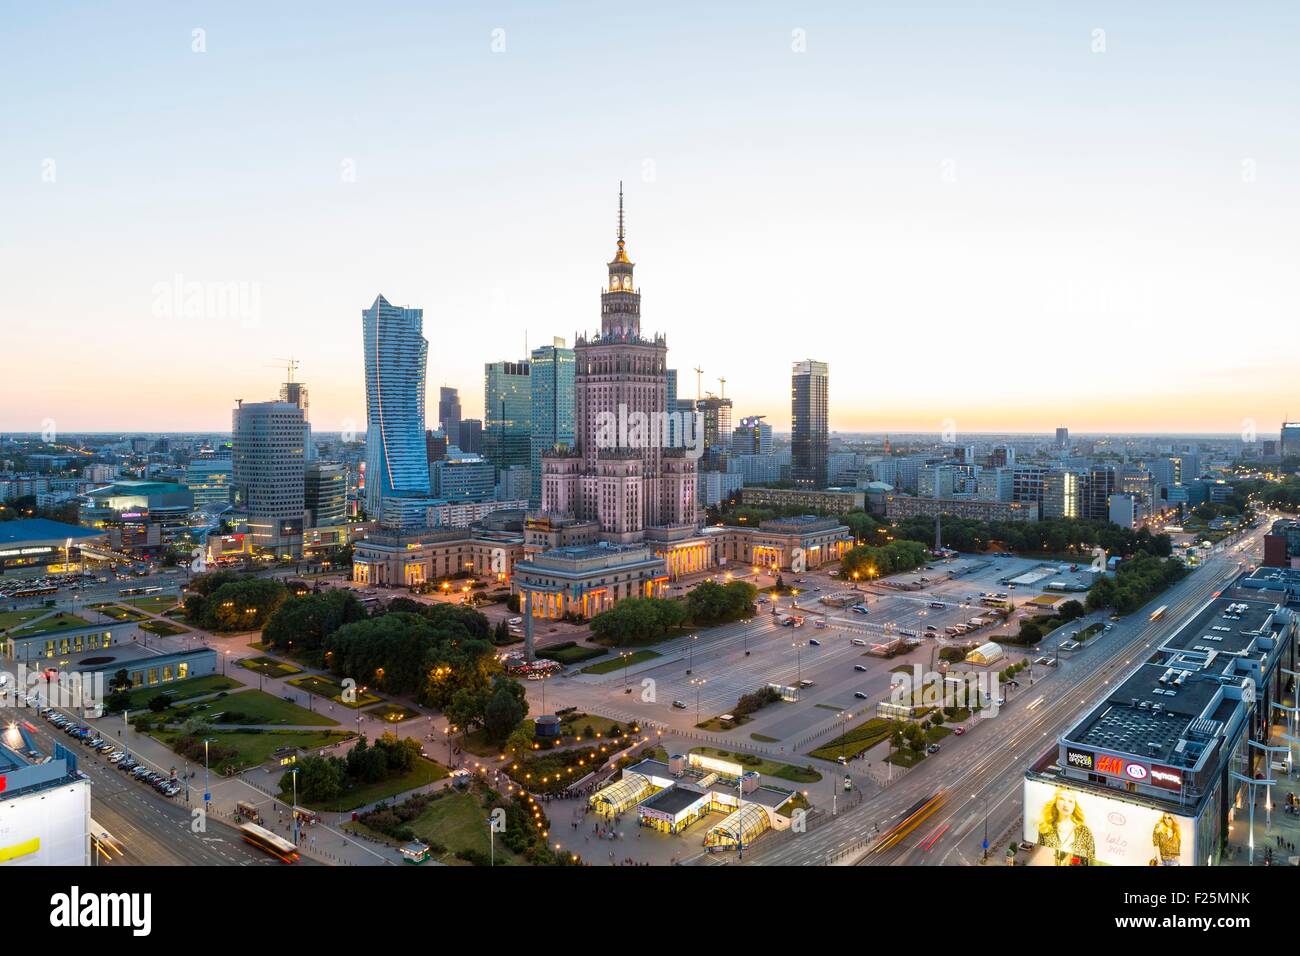 Poland, Mazovia region, Warsaw financial center and Palace of Culture and Science Stock Photo